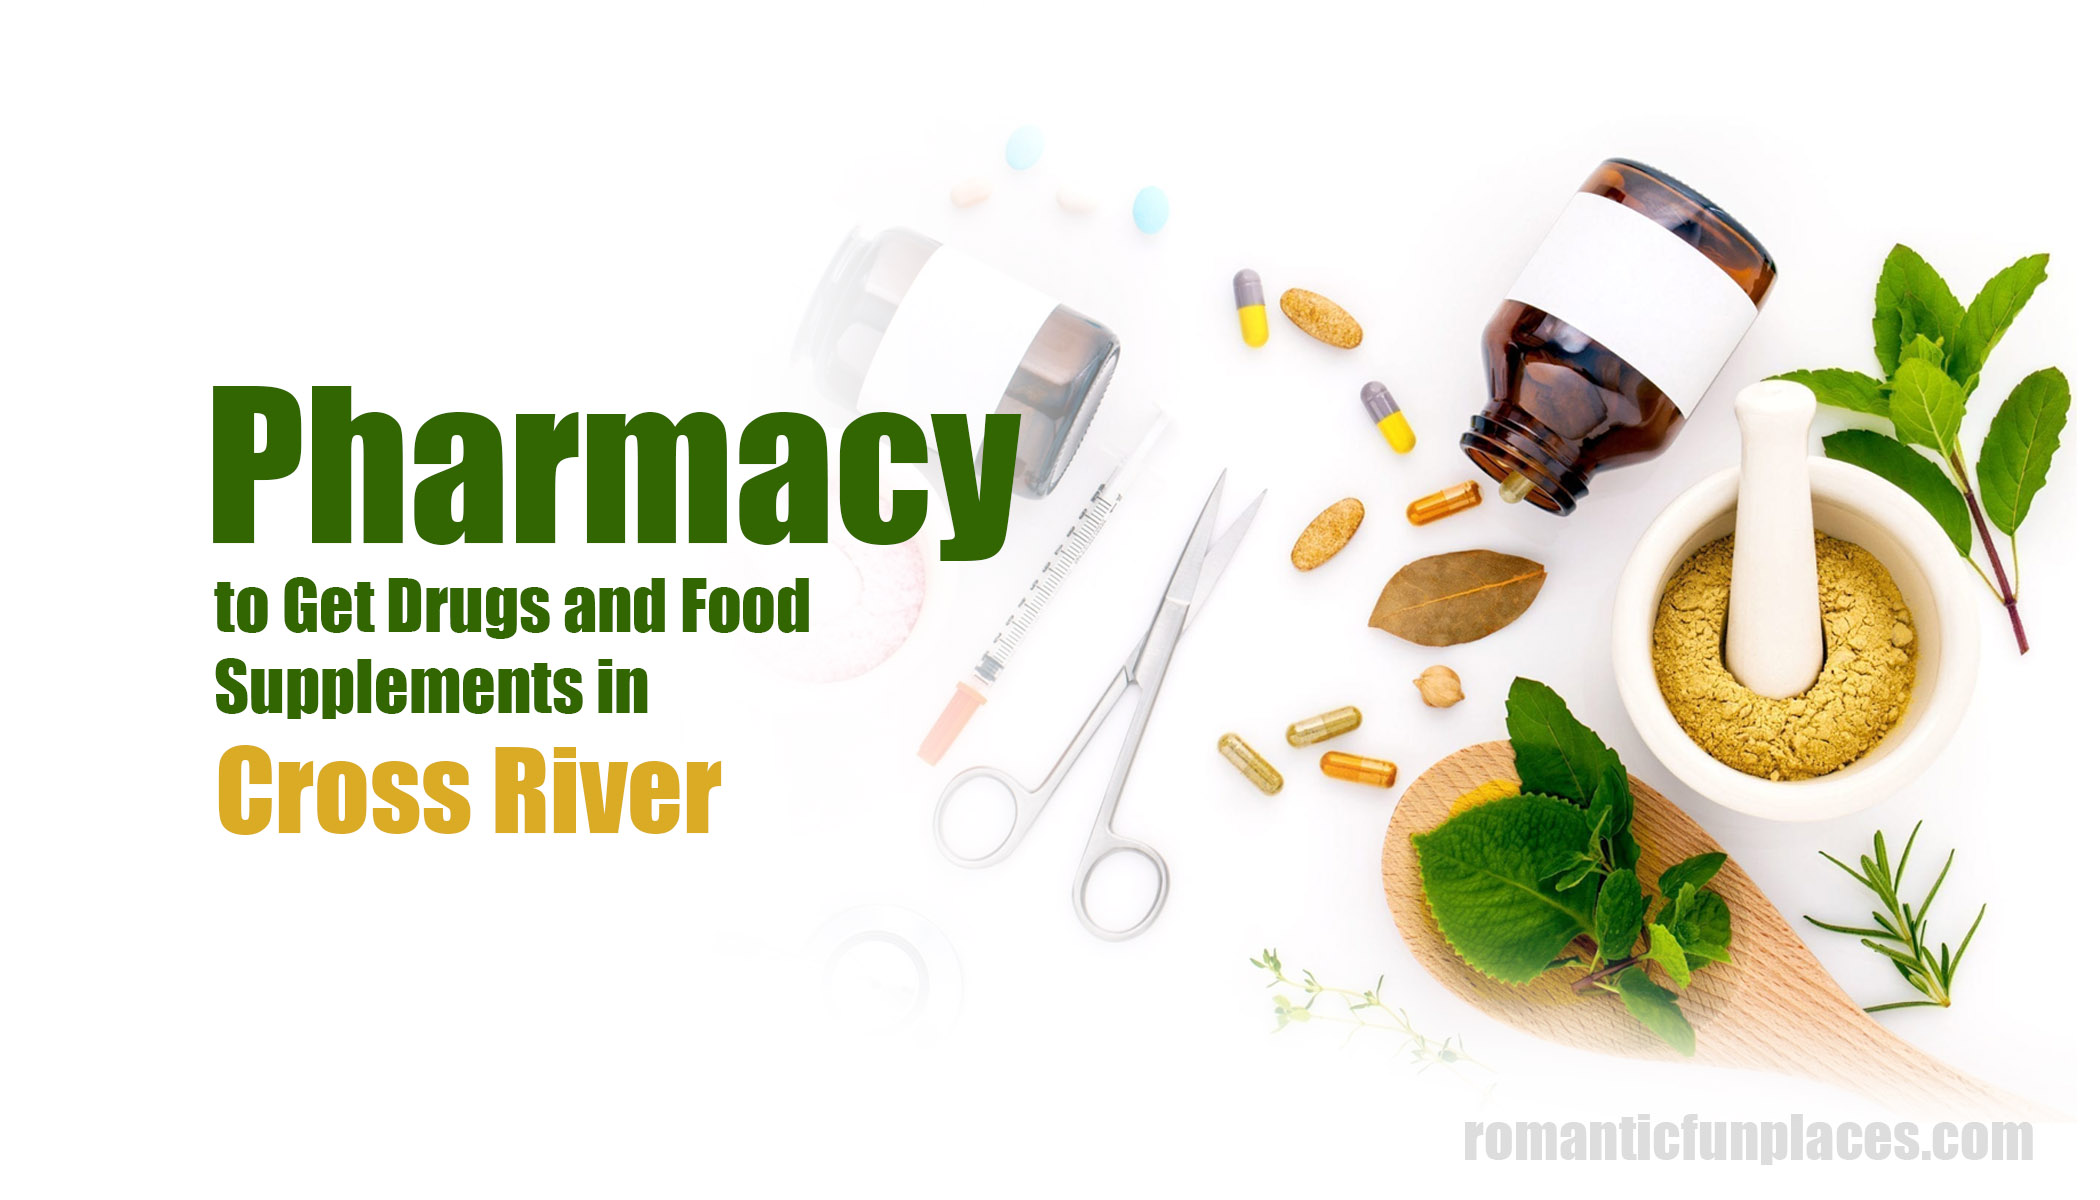 Pharmacy to Get Drugs and Food Supplements in Cross River